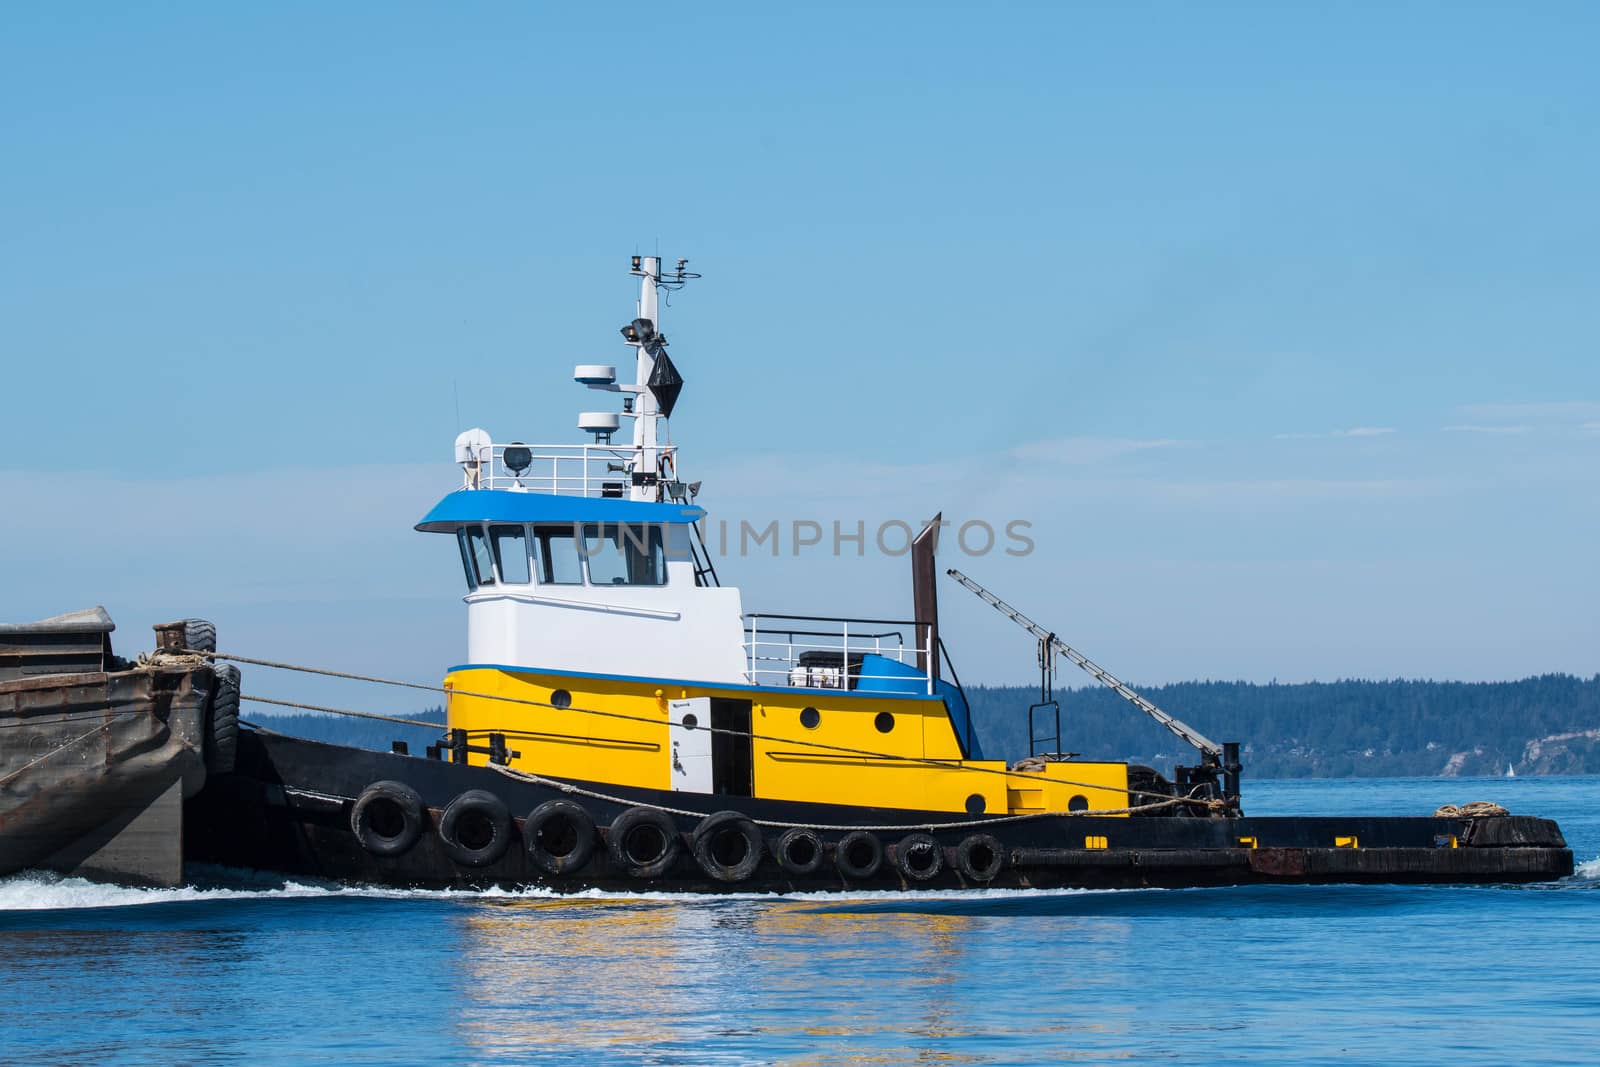 Tug Wasp pushing a barge by cestes001